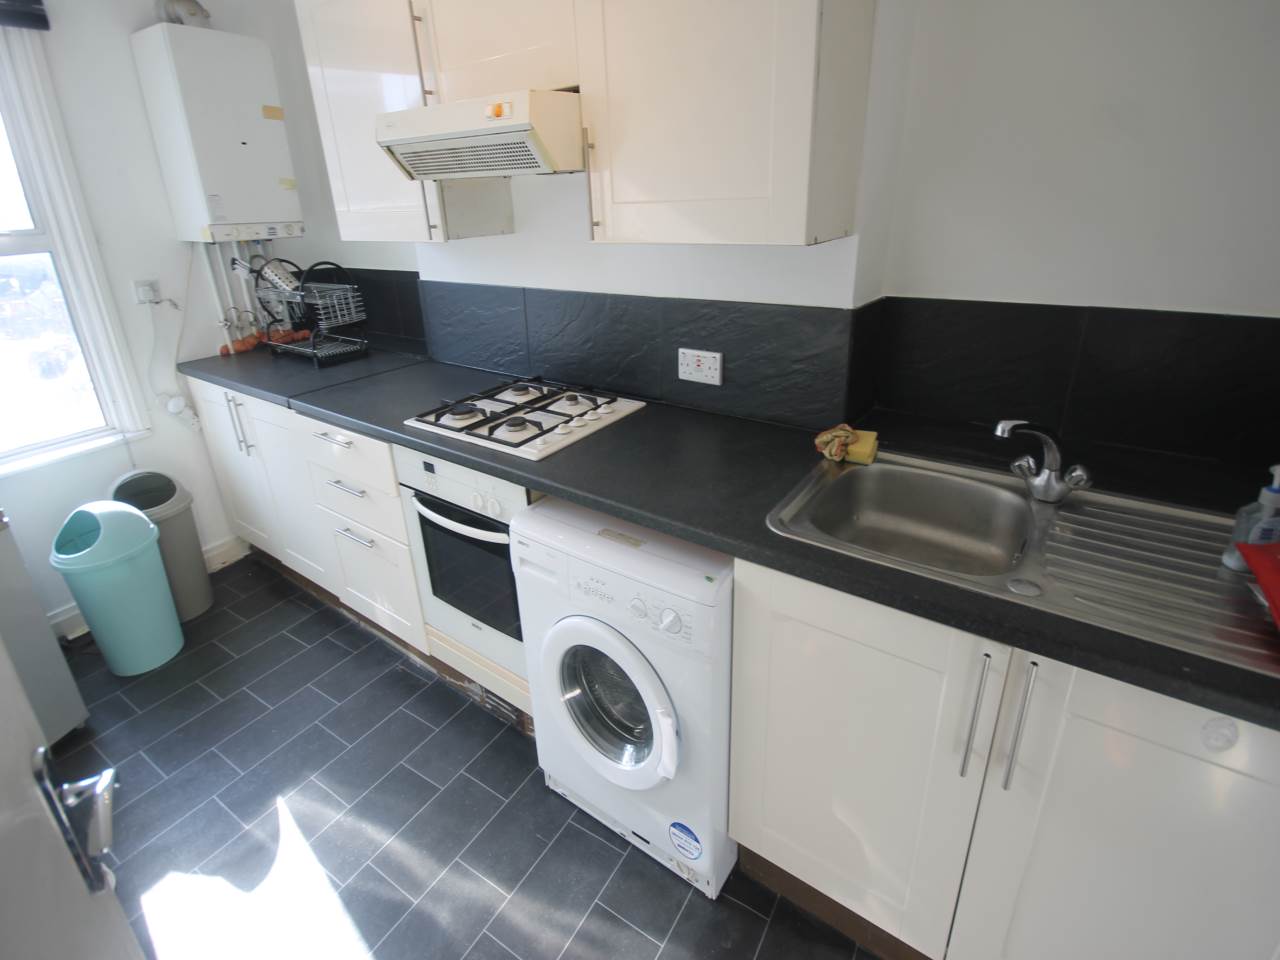 1 bed flat to rent in Osborne Mews, Walthamstow - Property Image 1